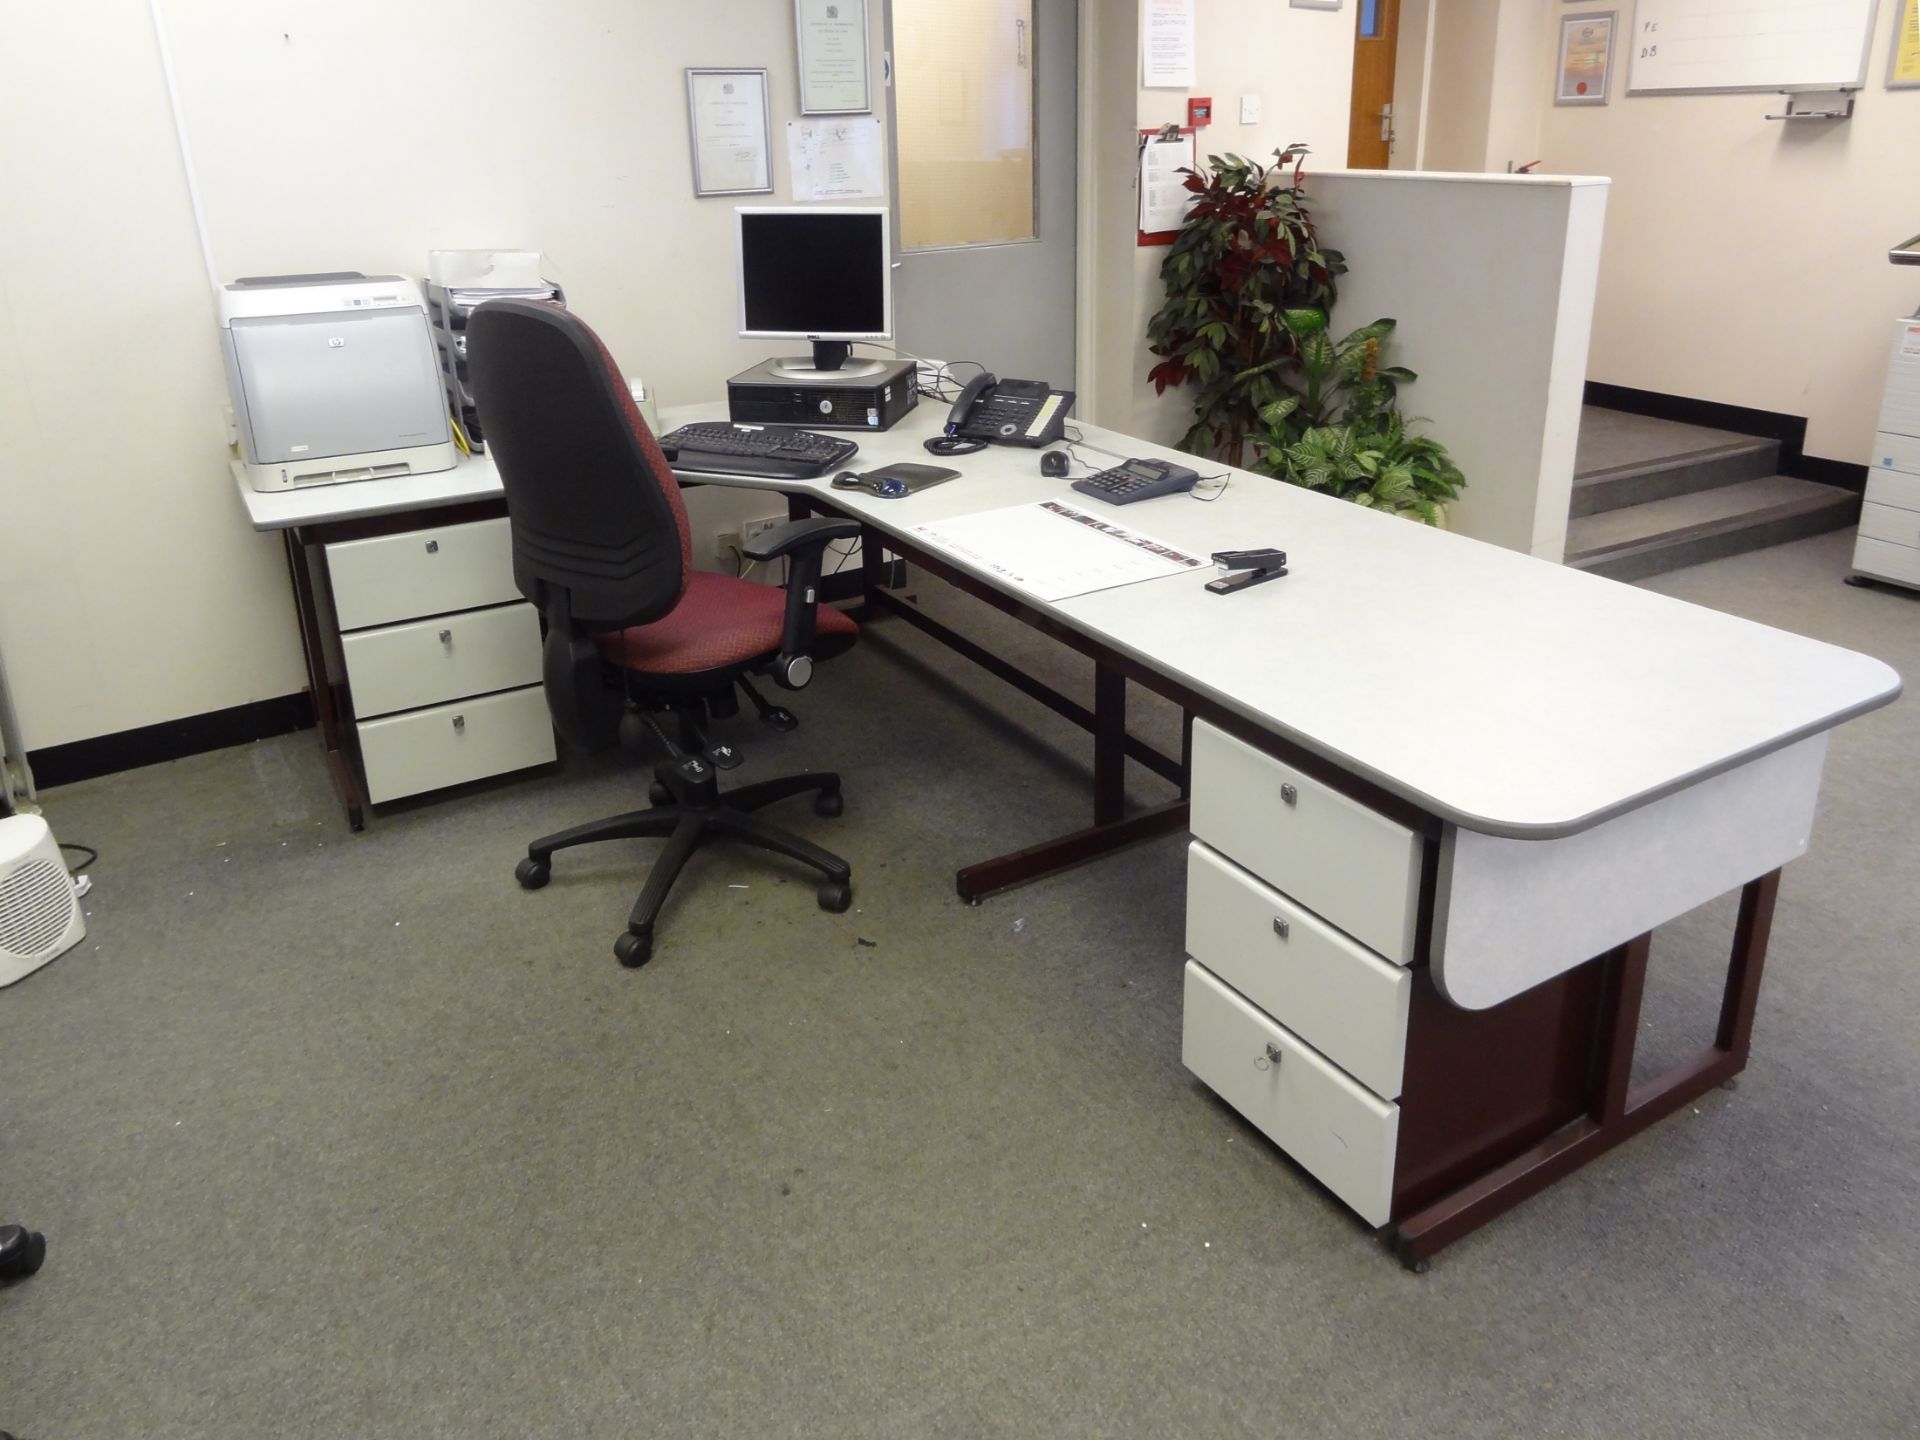 Two Section L Shaped Desk, one section approx. 2.75m x 800mm, other section 1.8m x 600mm, with